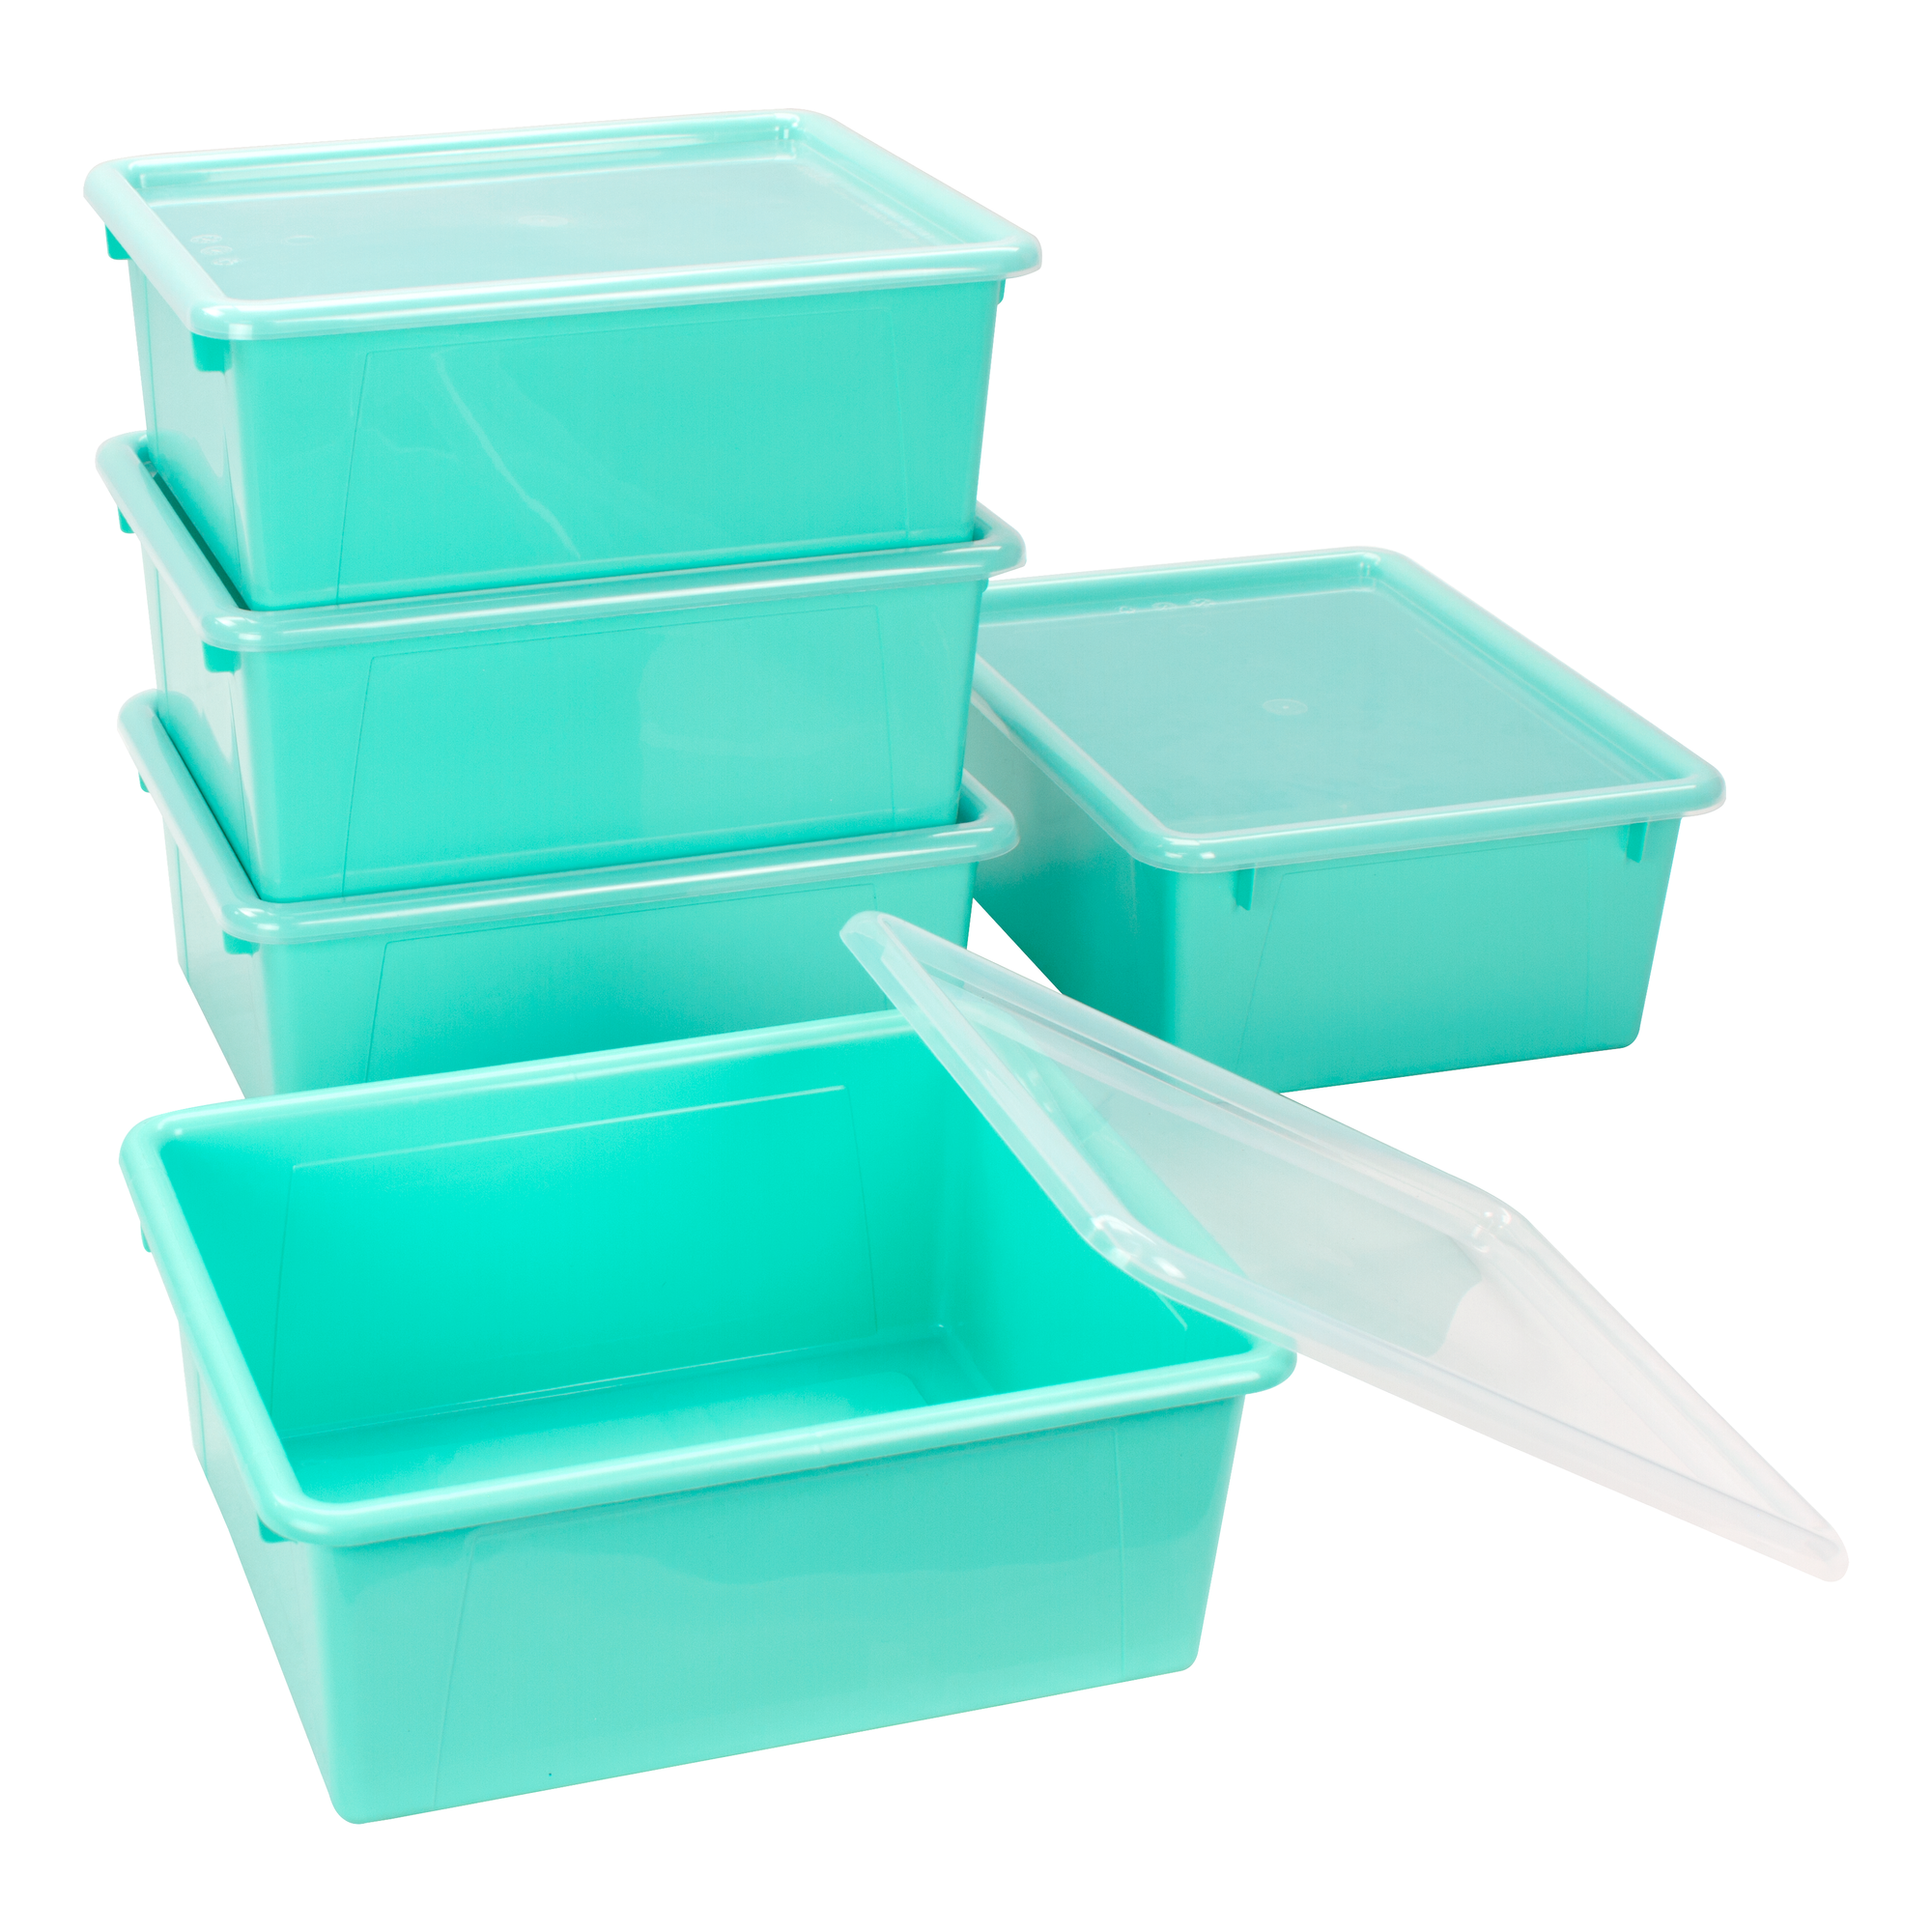 Storex Deep Storage Tray with Lid, Letter Size, 10 x 13 x 5 Inches, Teal, 5-Pack